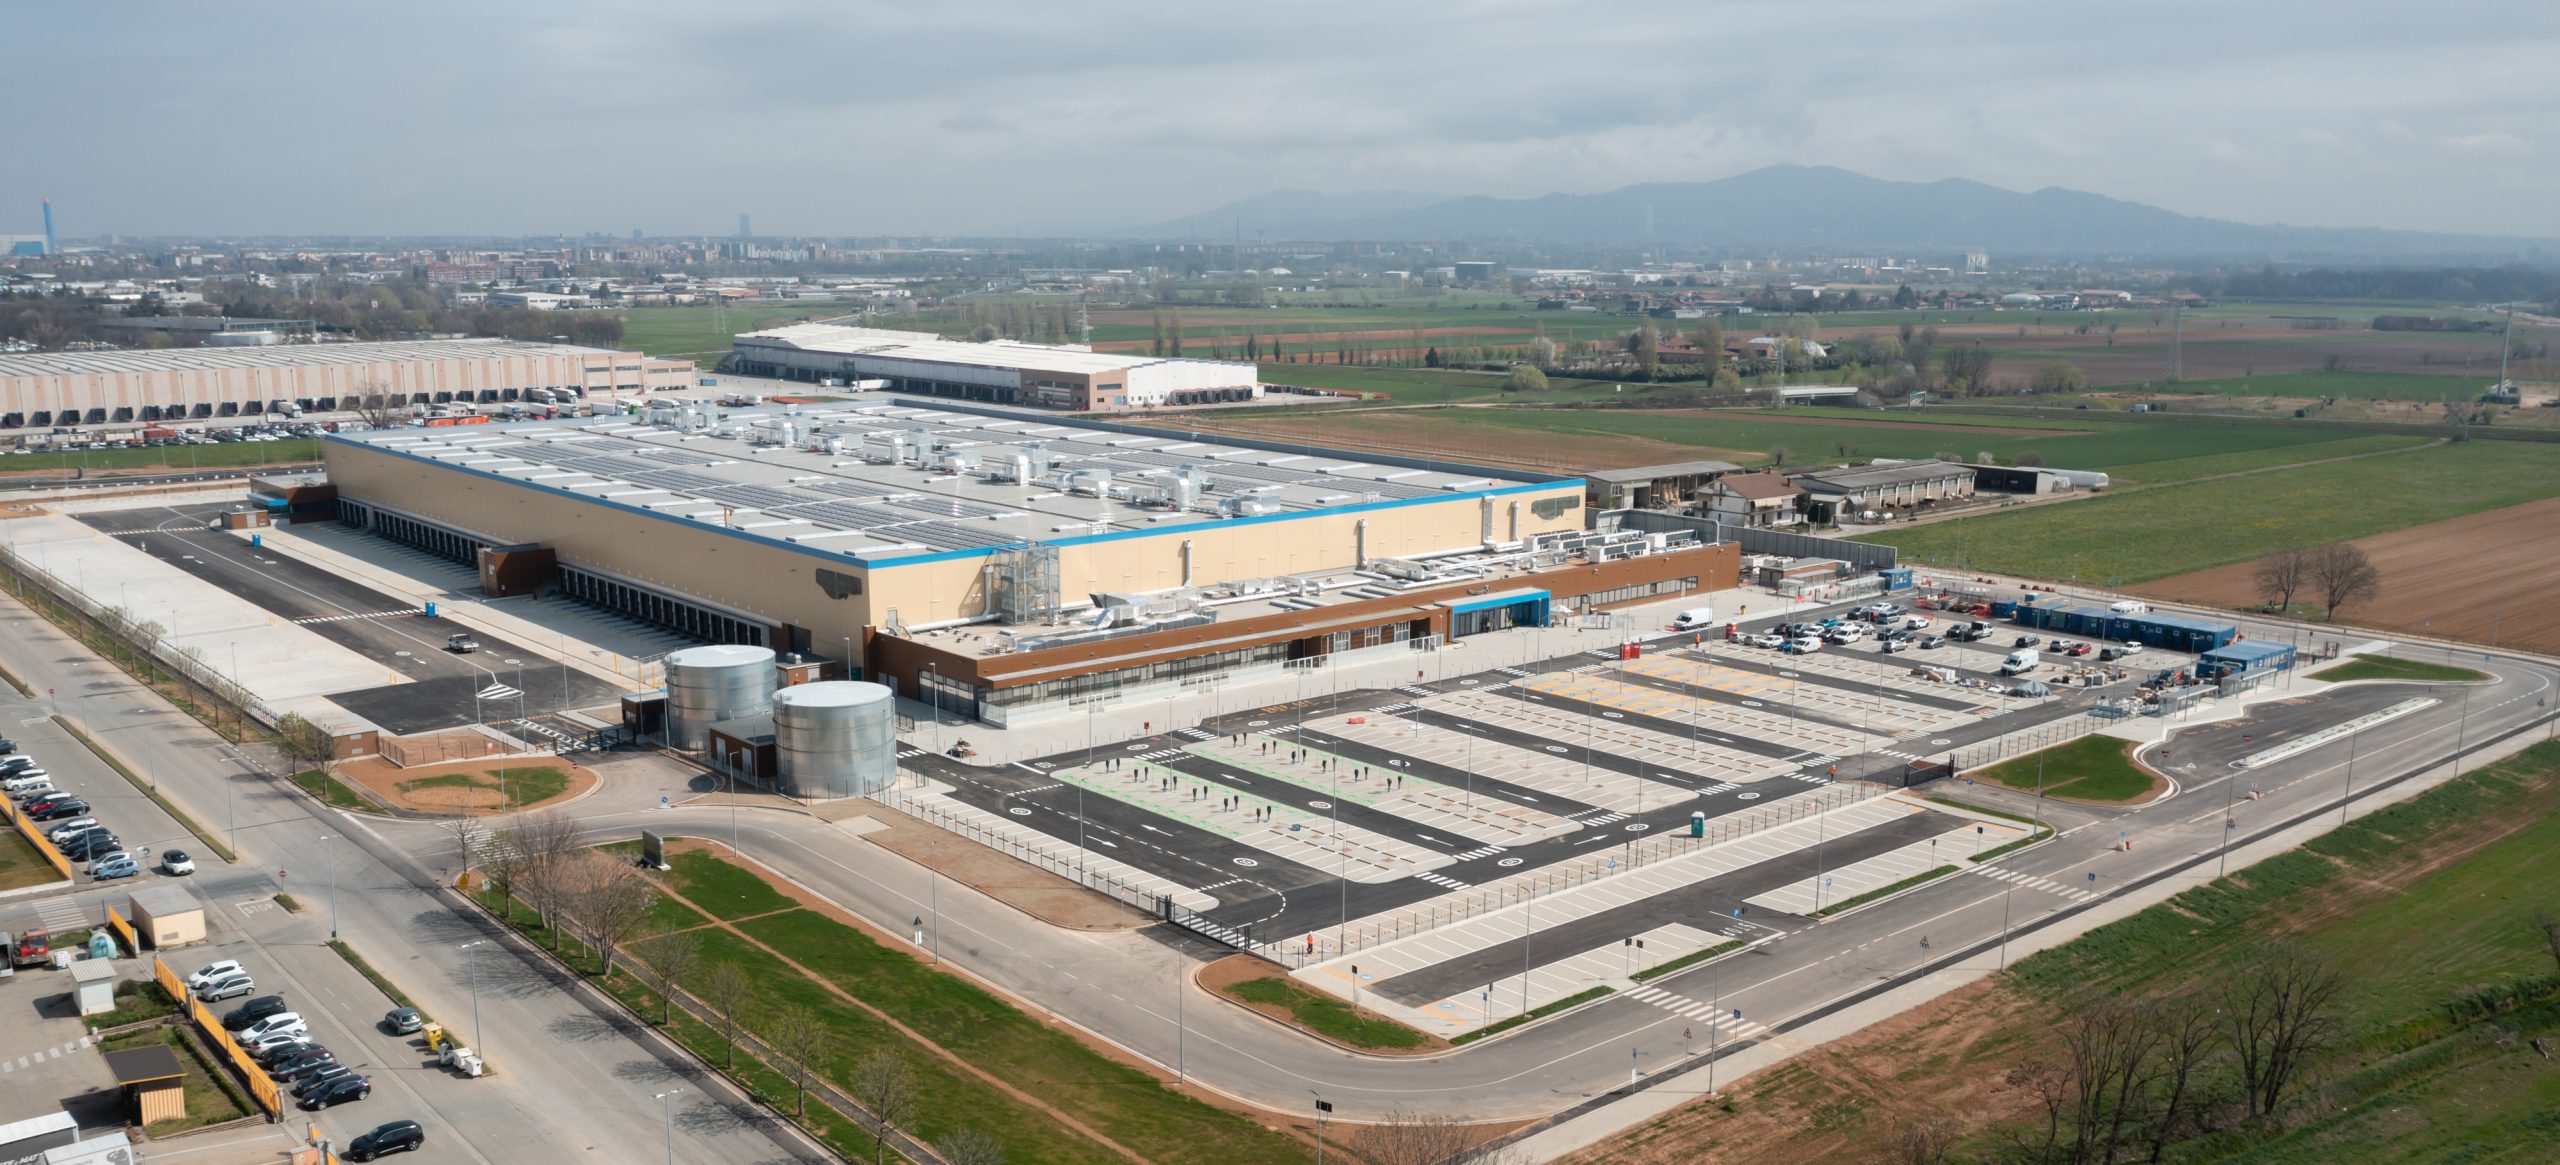 GSE ITALIA FOR VAILOG-SEGRO: THE LOGISTICS WAREHOUSE VIRTUOUS EXAMPLE OF GREEN BUILDING